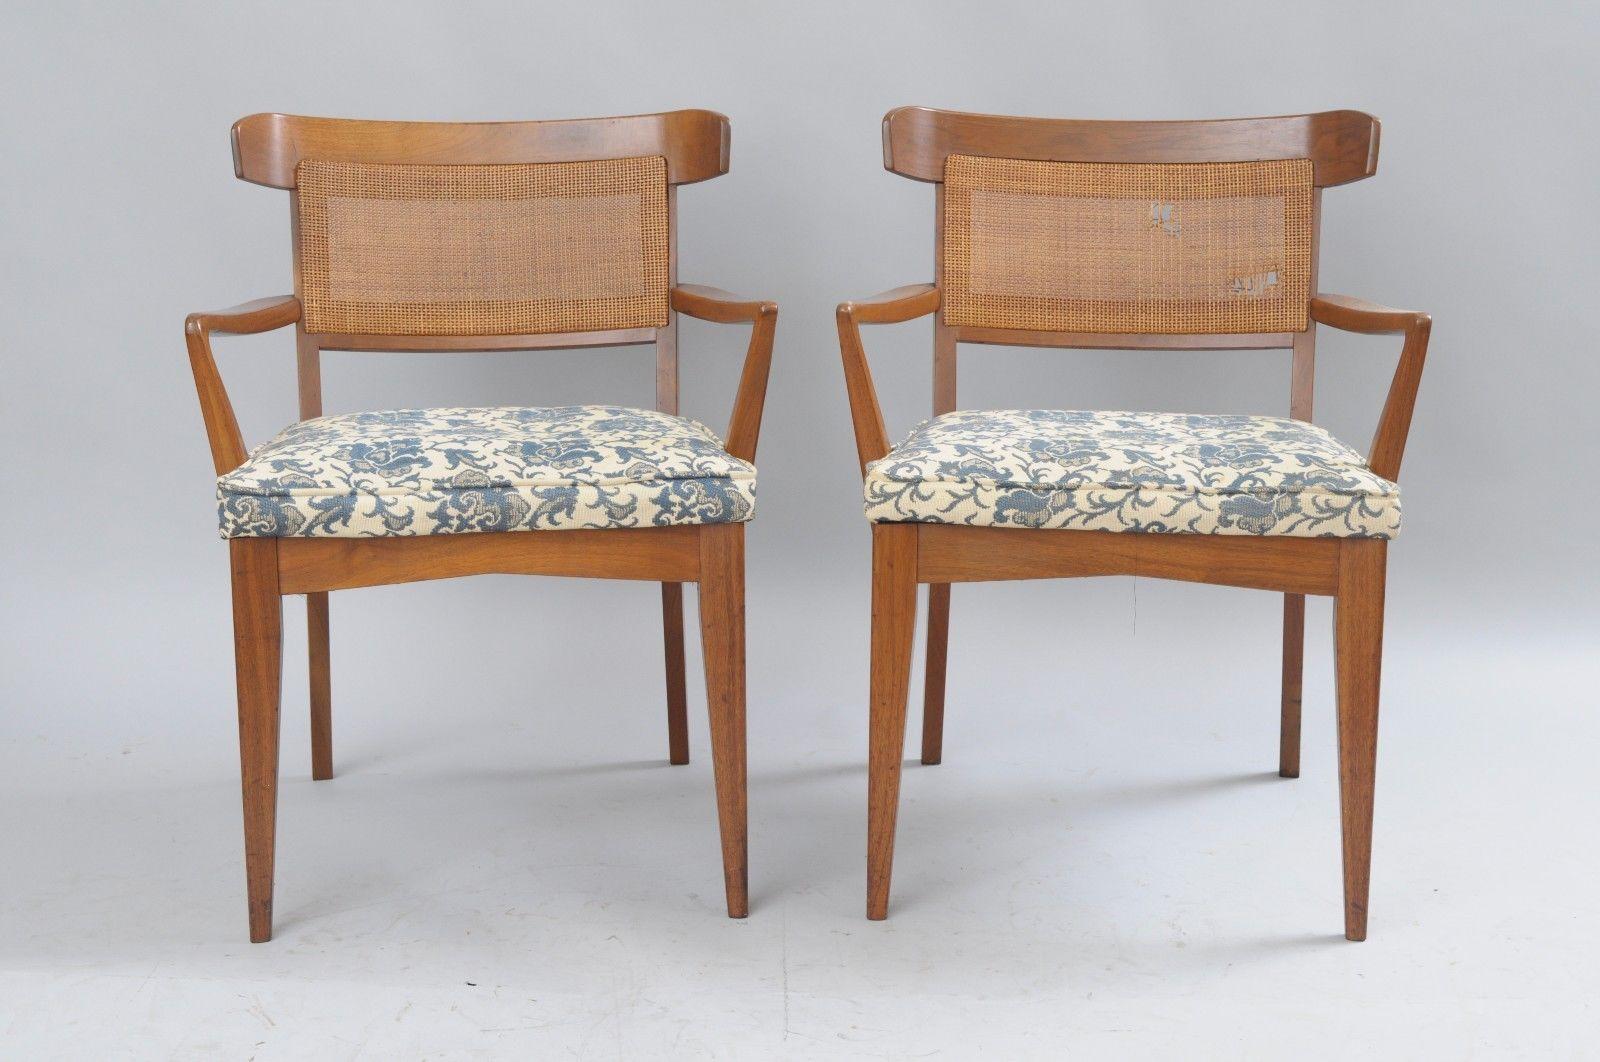 Set of six Mid-Century Modern walnut curved cane back dining chairs by Modern Manor Inc. Item features two armchairs, four side chairs, solid walnut wood construction, curved and caned backs, tapered legs, original label to underside. Style similar